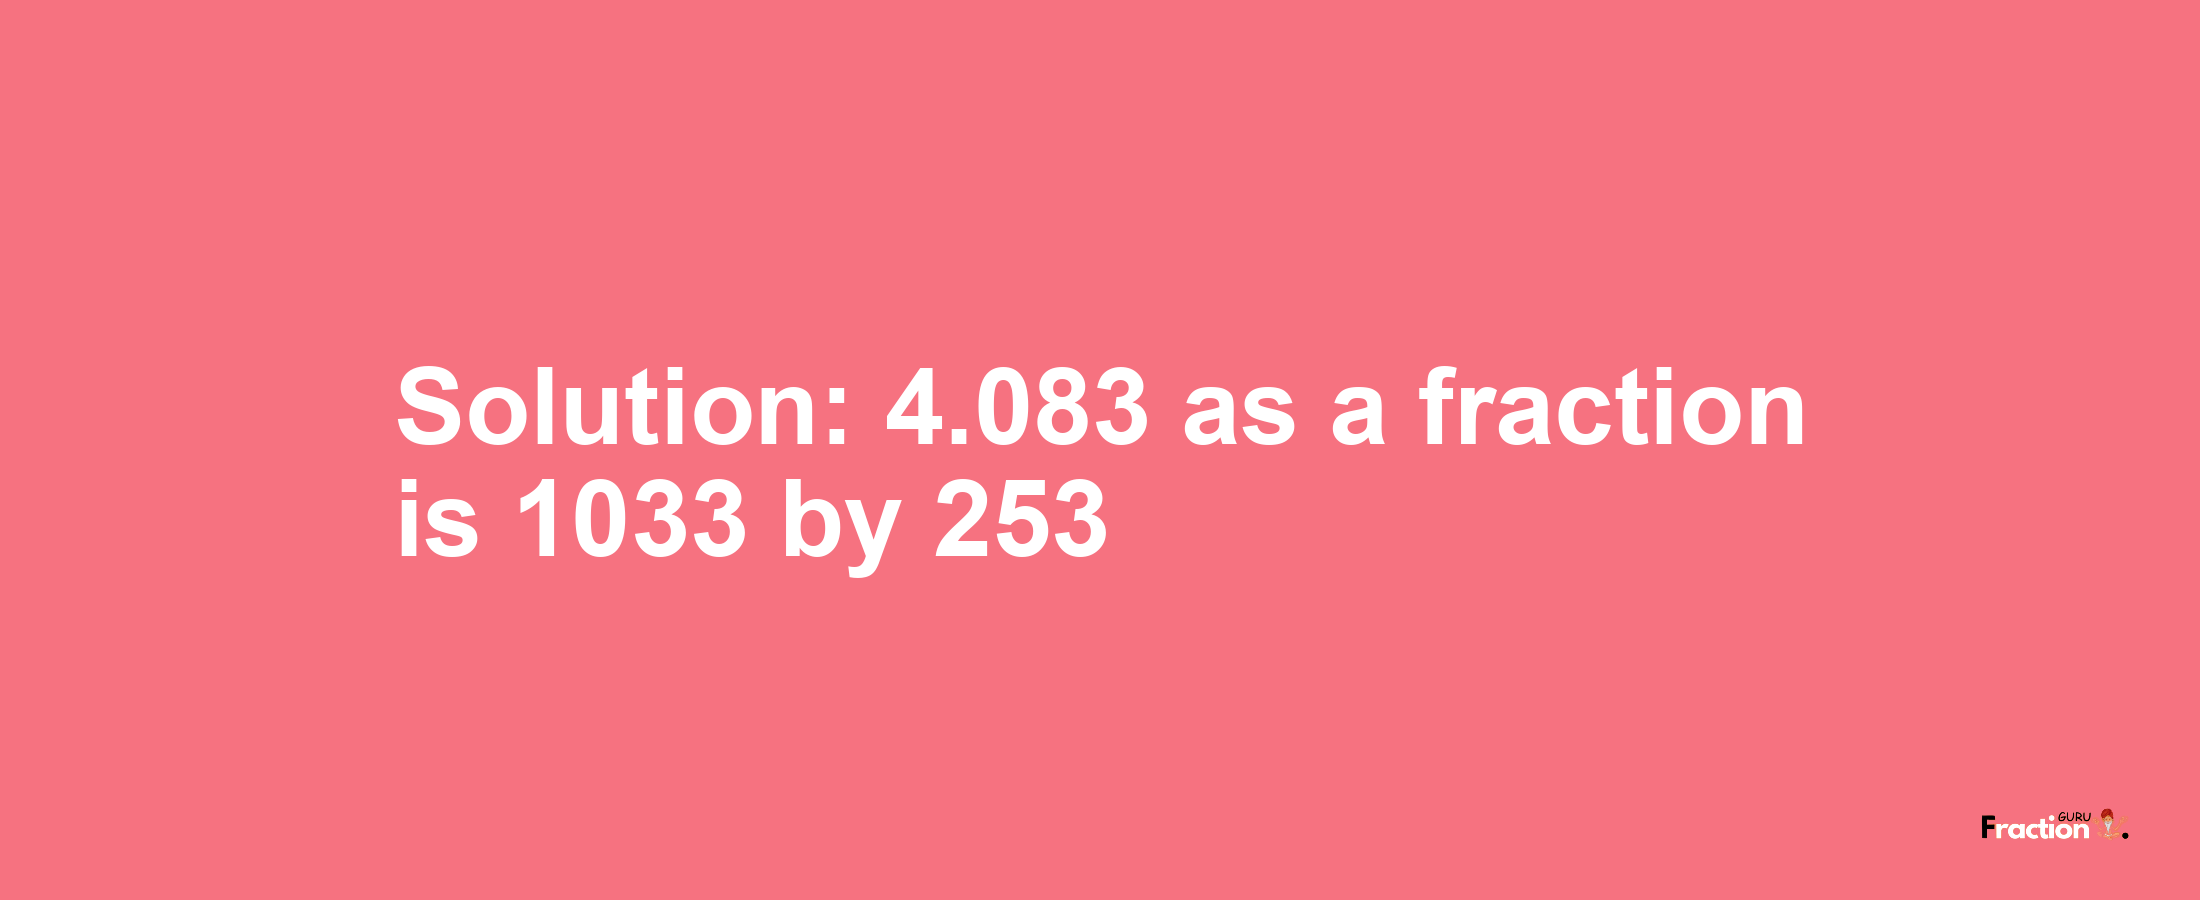 Solution:4.083 as a fraction is 1033/253